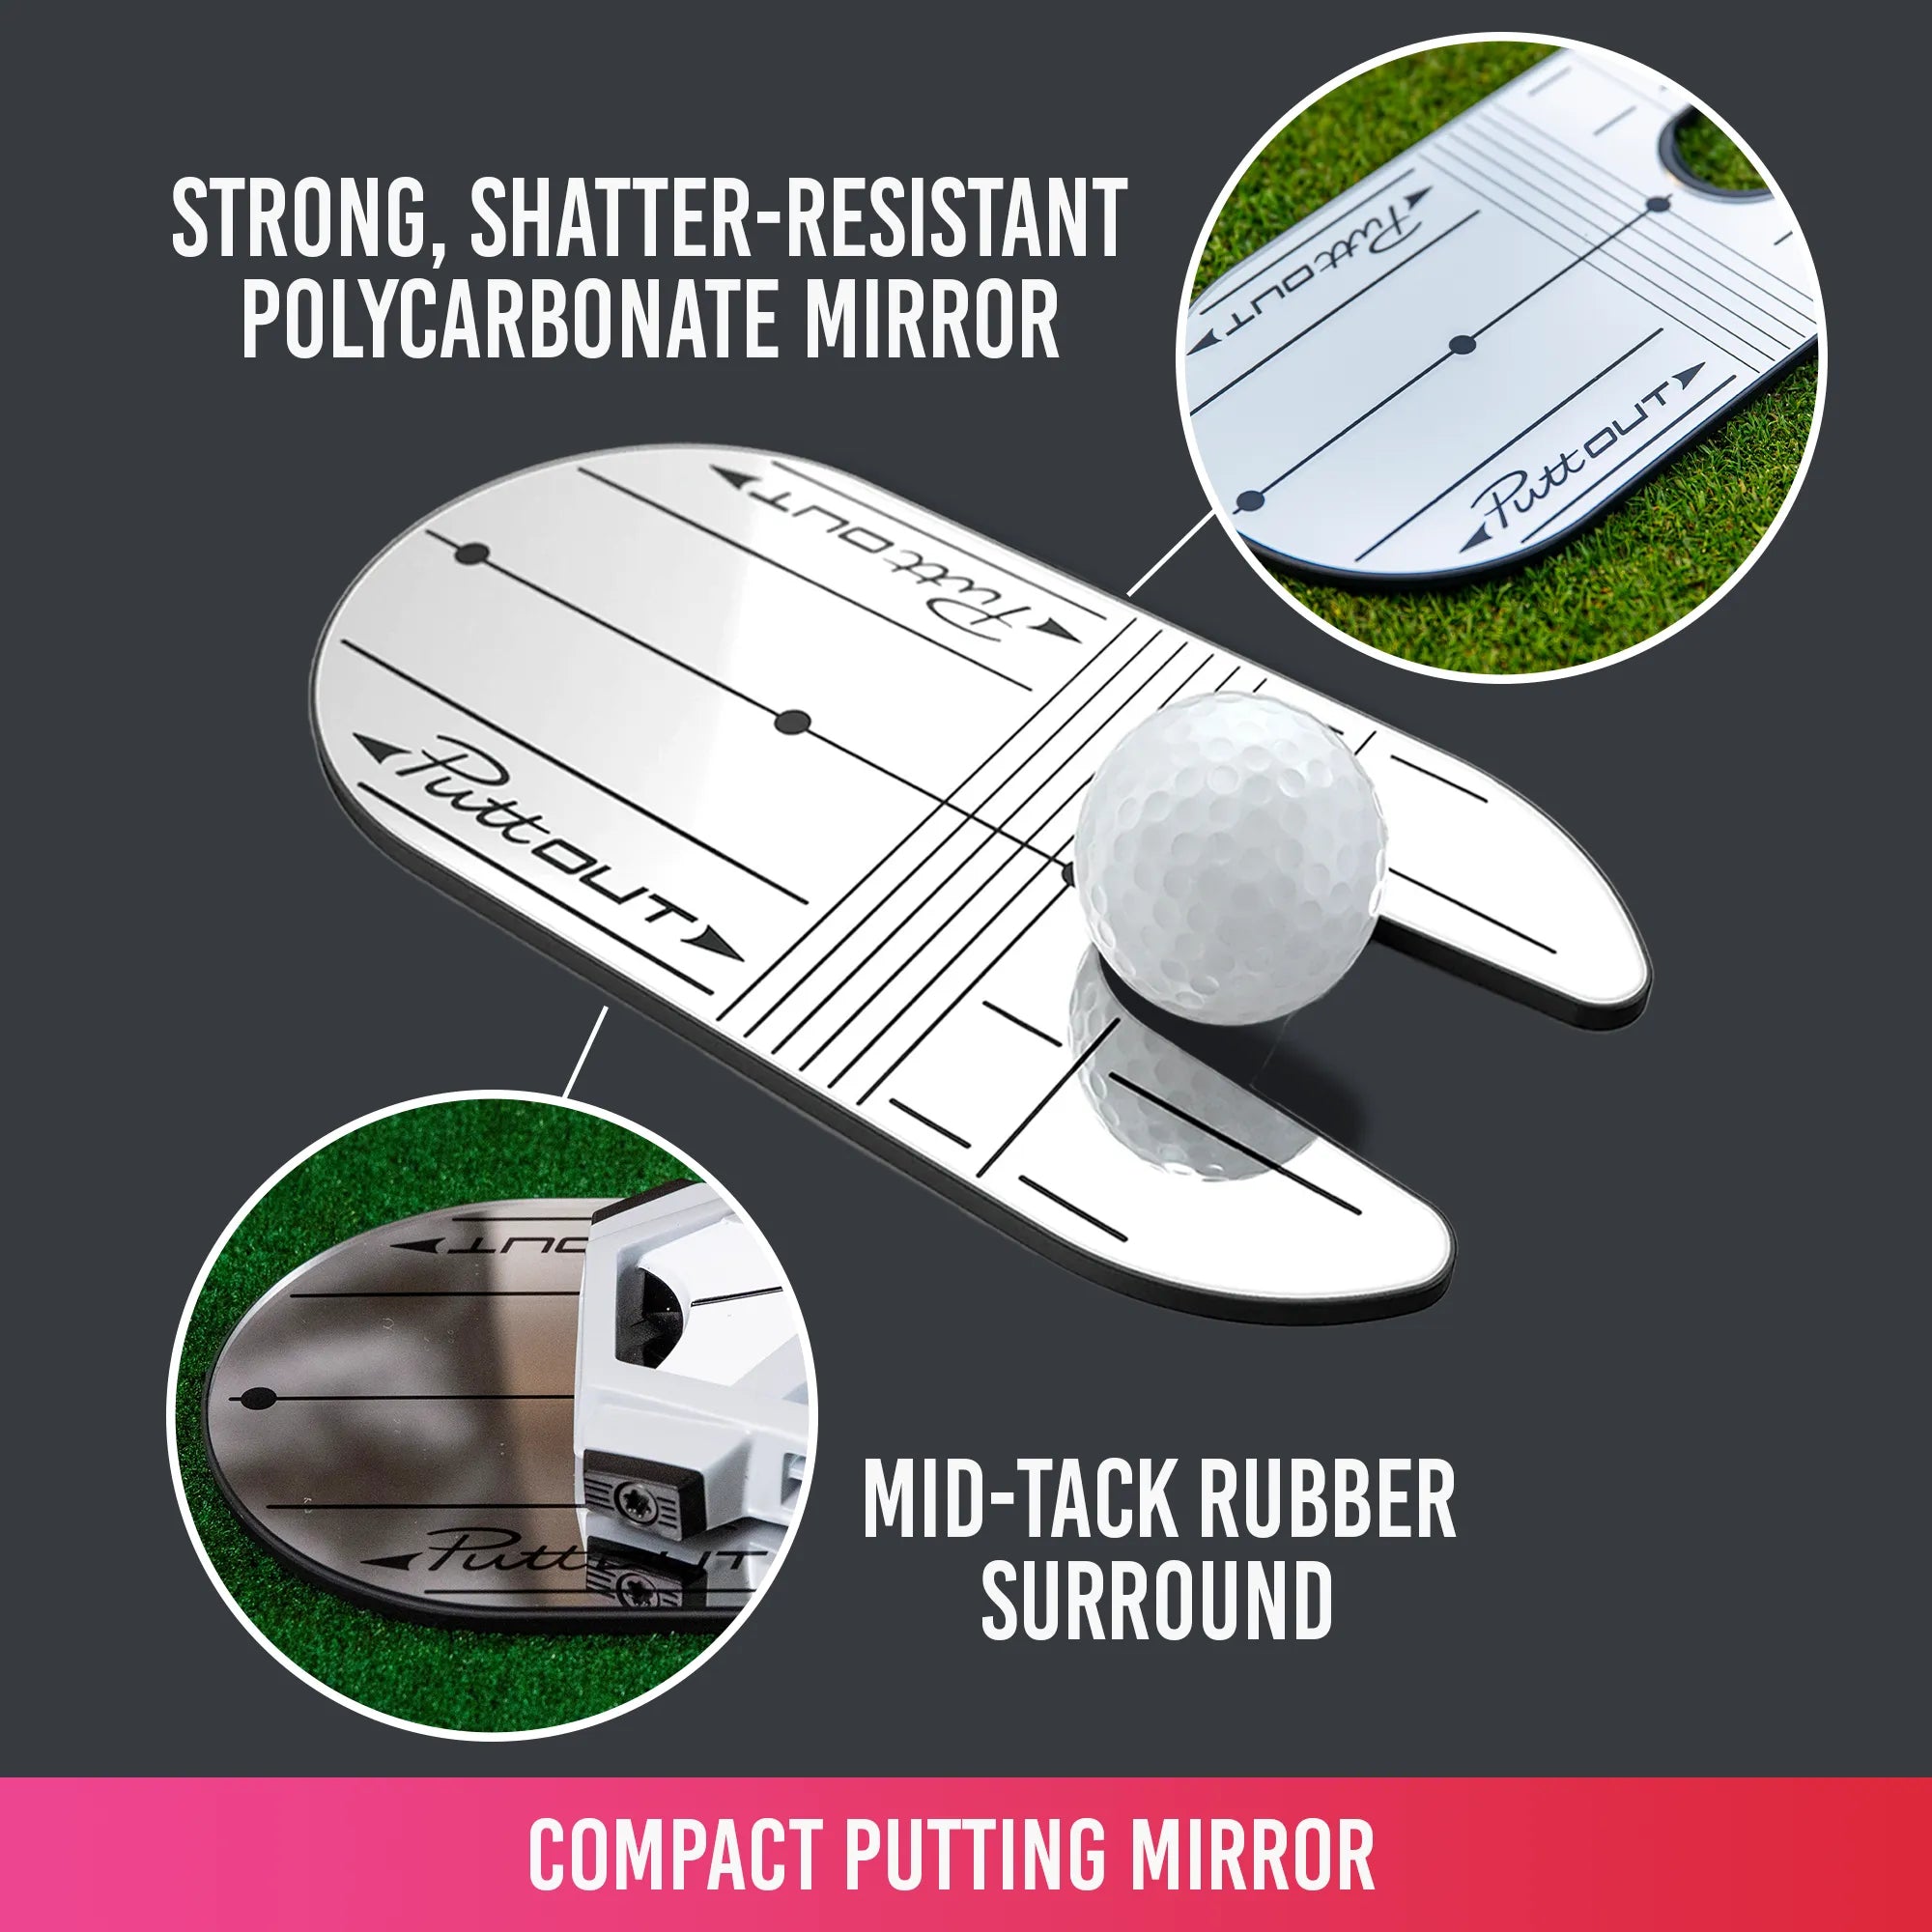 Compact Putting Mirror